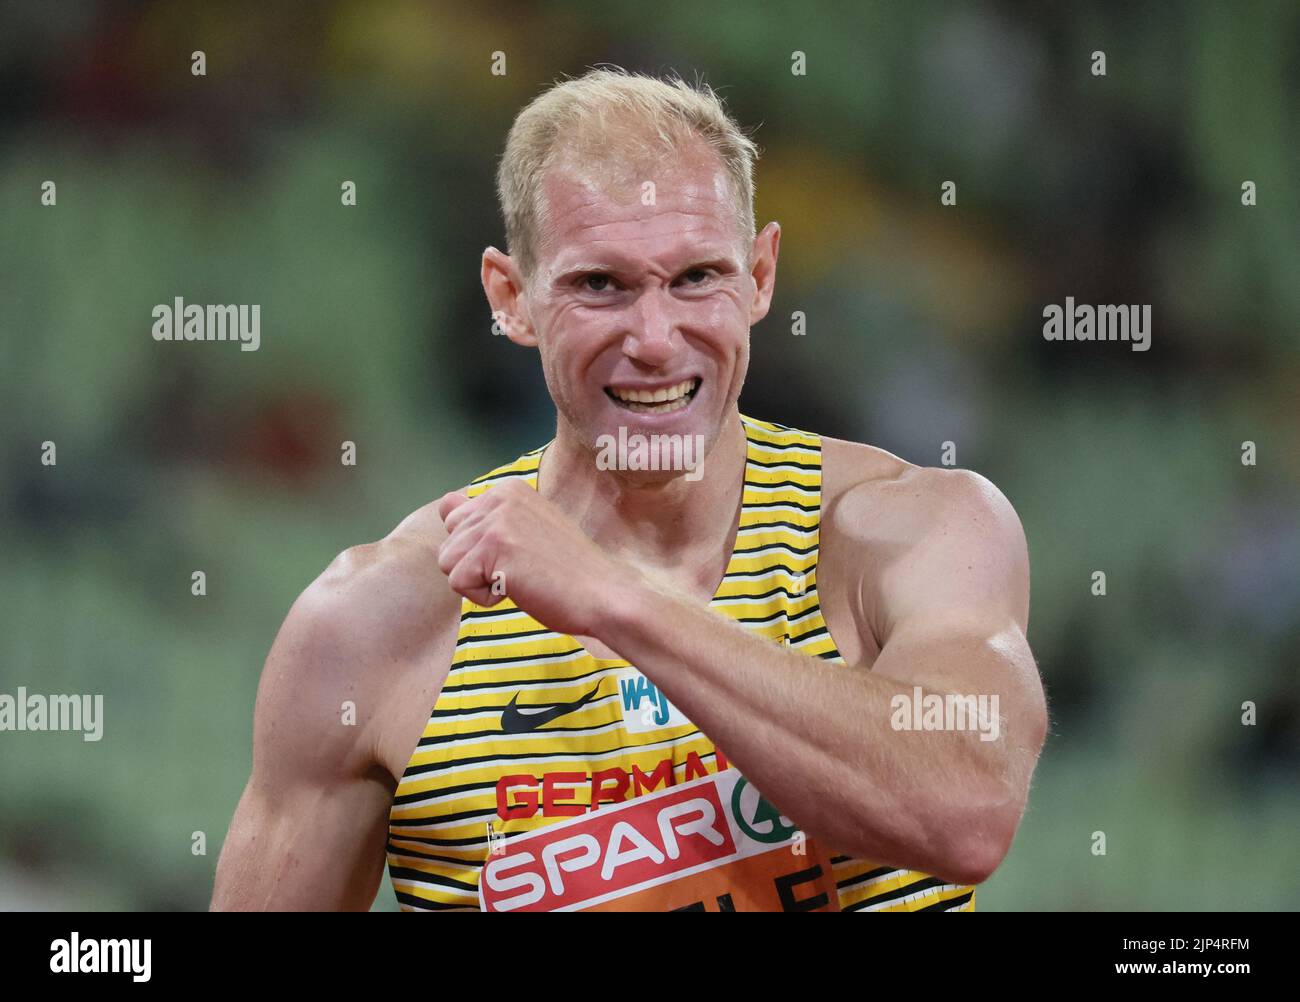 Athletics - 2022 European Championships - Olympiastadion, Munich, Germany - August 15, 2022 Germany's Arthur Abele reacts after his men's decathlon 400m heat REUTERS/Wolfgang Rattay Stock Photo